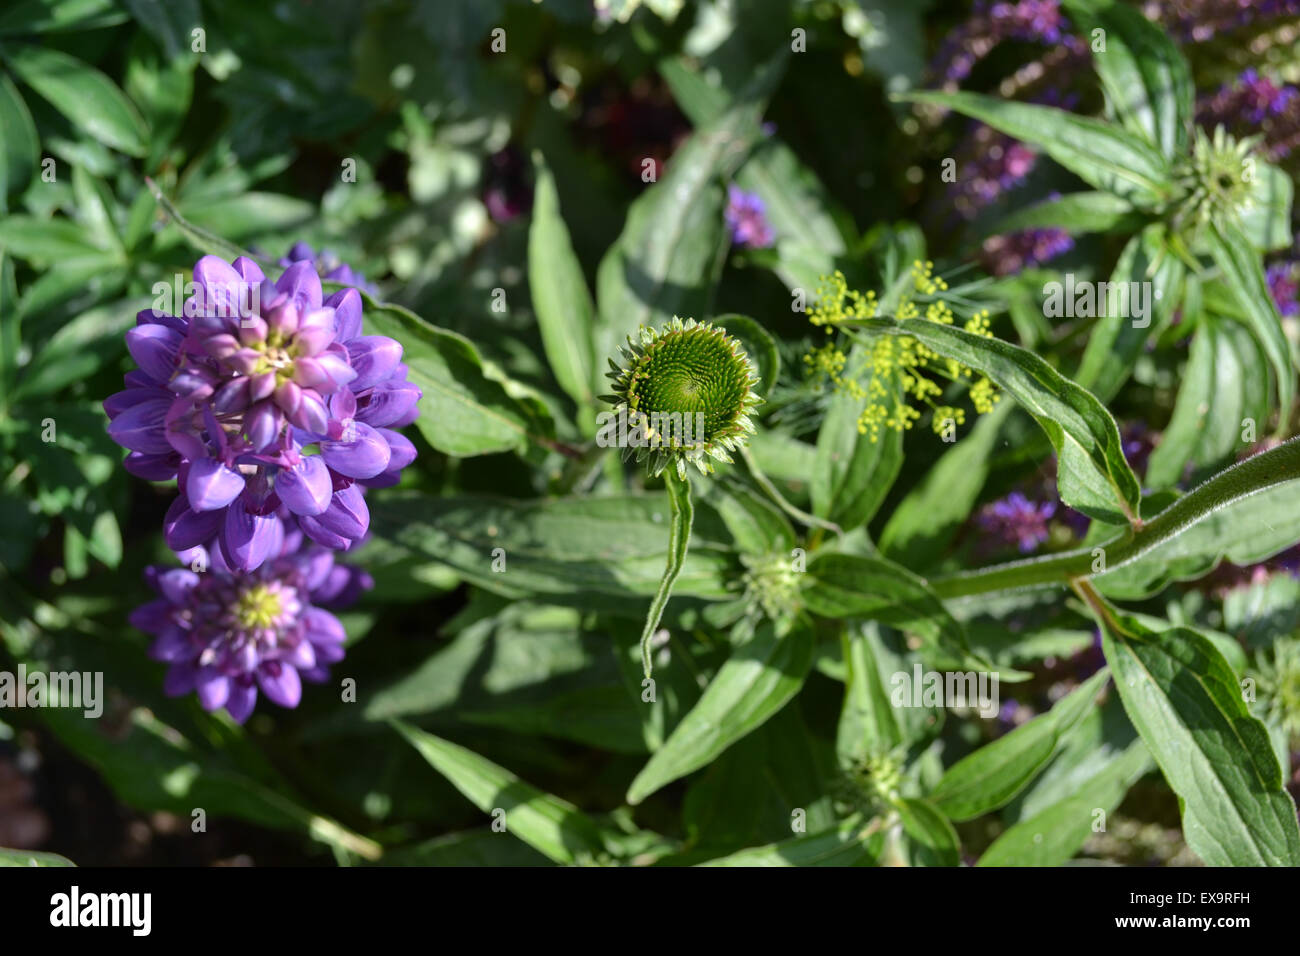 From the left, a Lupin (Gallery Blue), Echinacea plant in bud, and dill, with verbena growing below Stock Photo